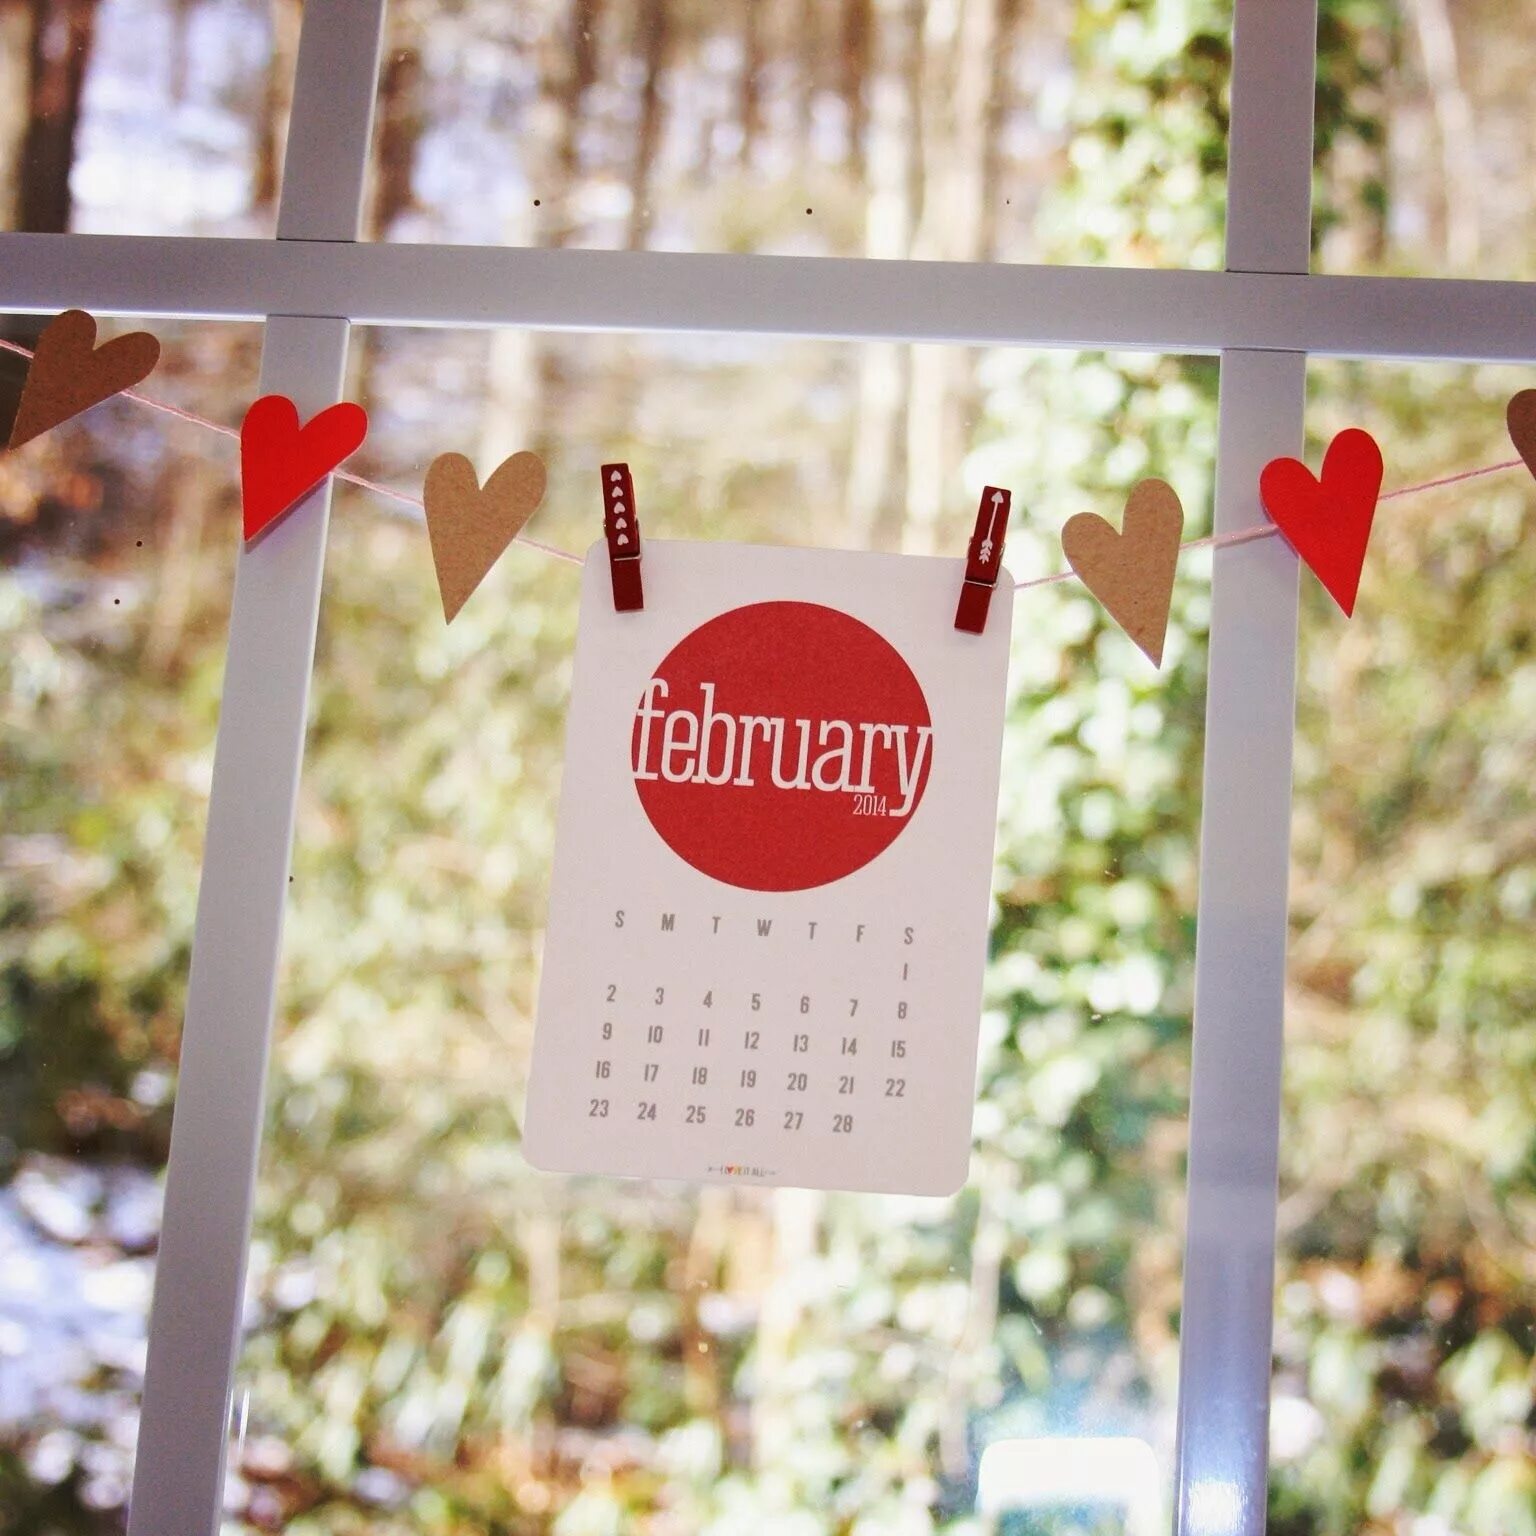 February is month of the year. February картинки. Февраль hello February. Hello February картинка. Обои на рабочий стол hello February.